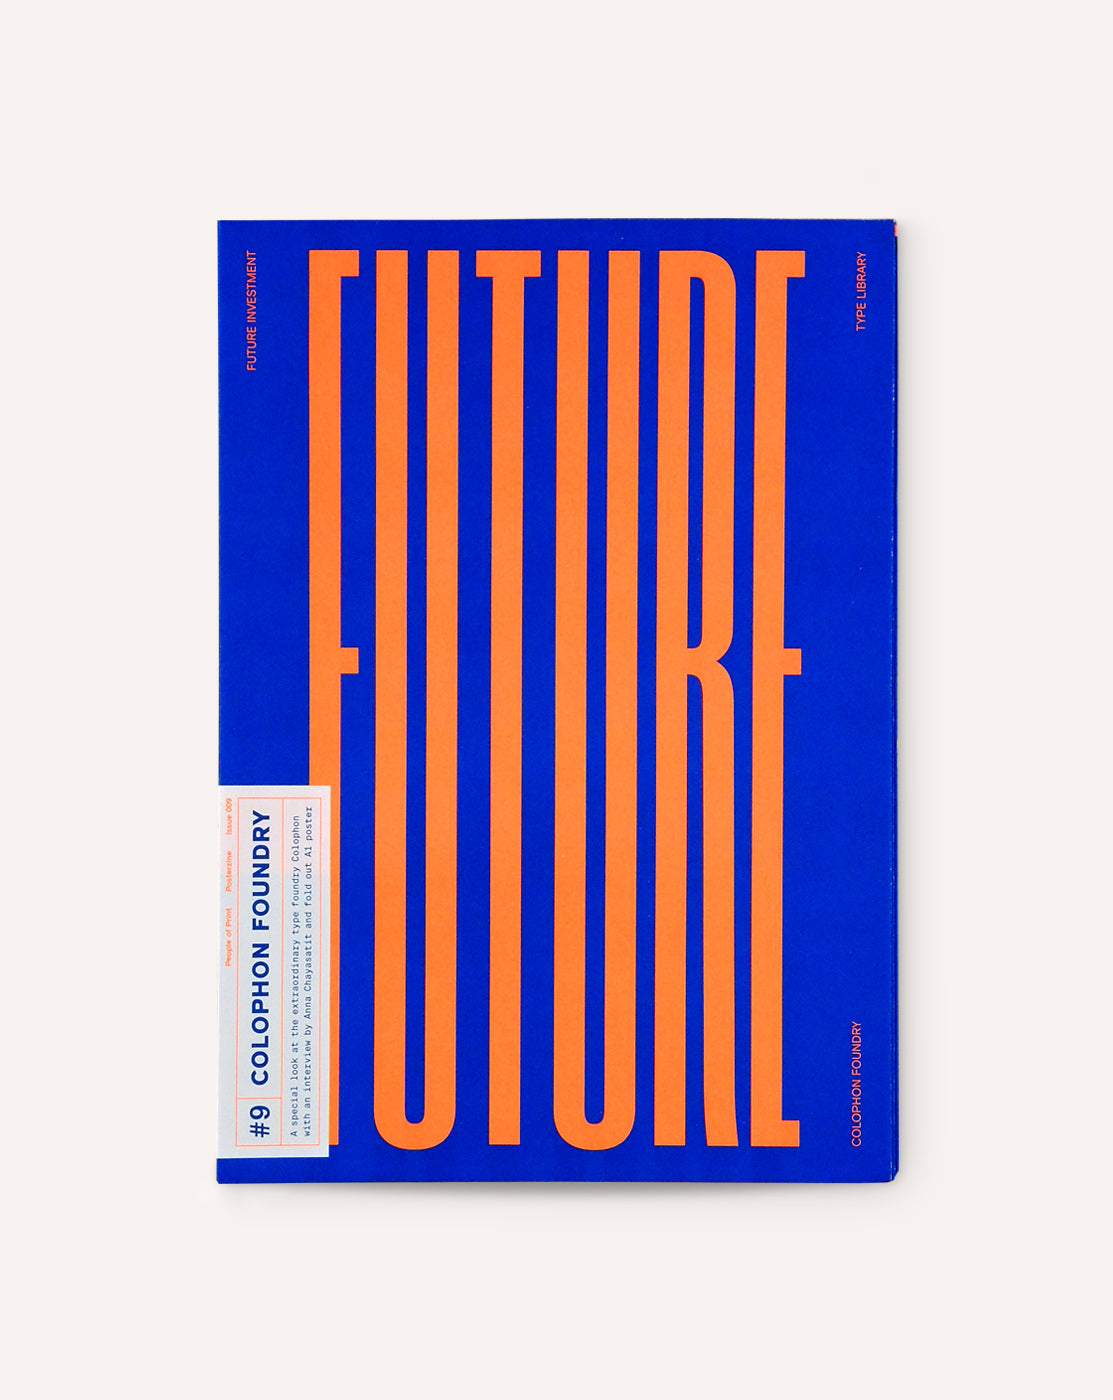 Posterzine Issue 9, Colophon Foundry